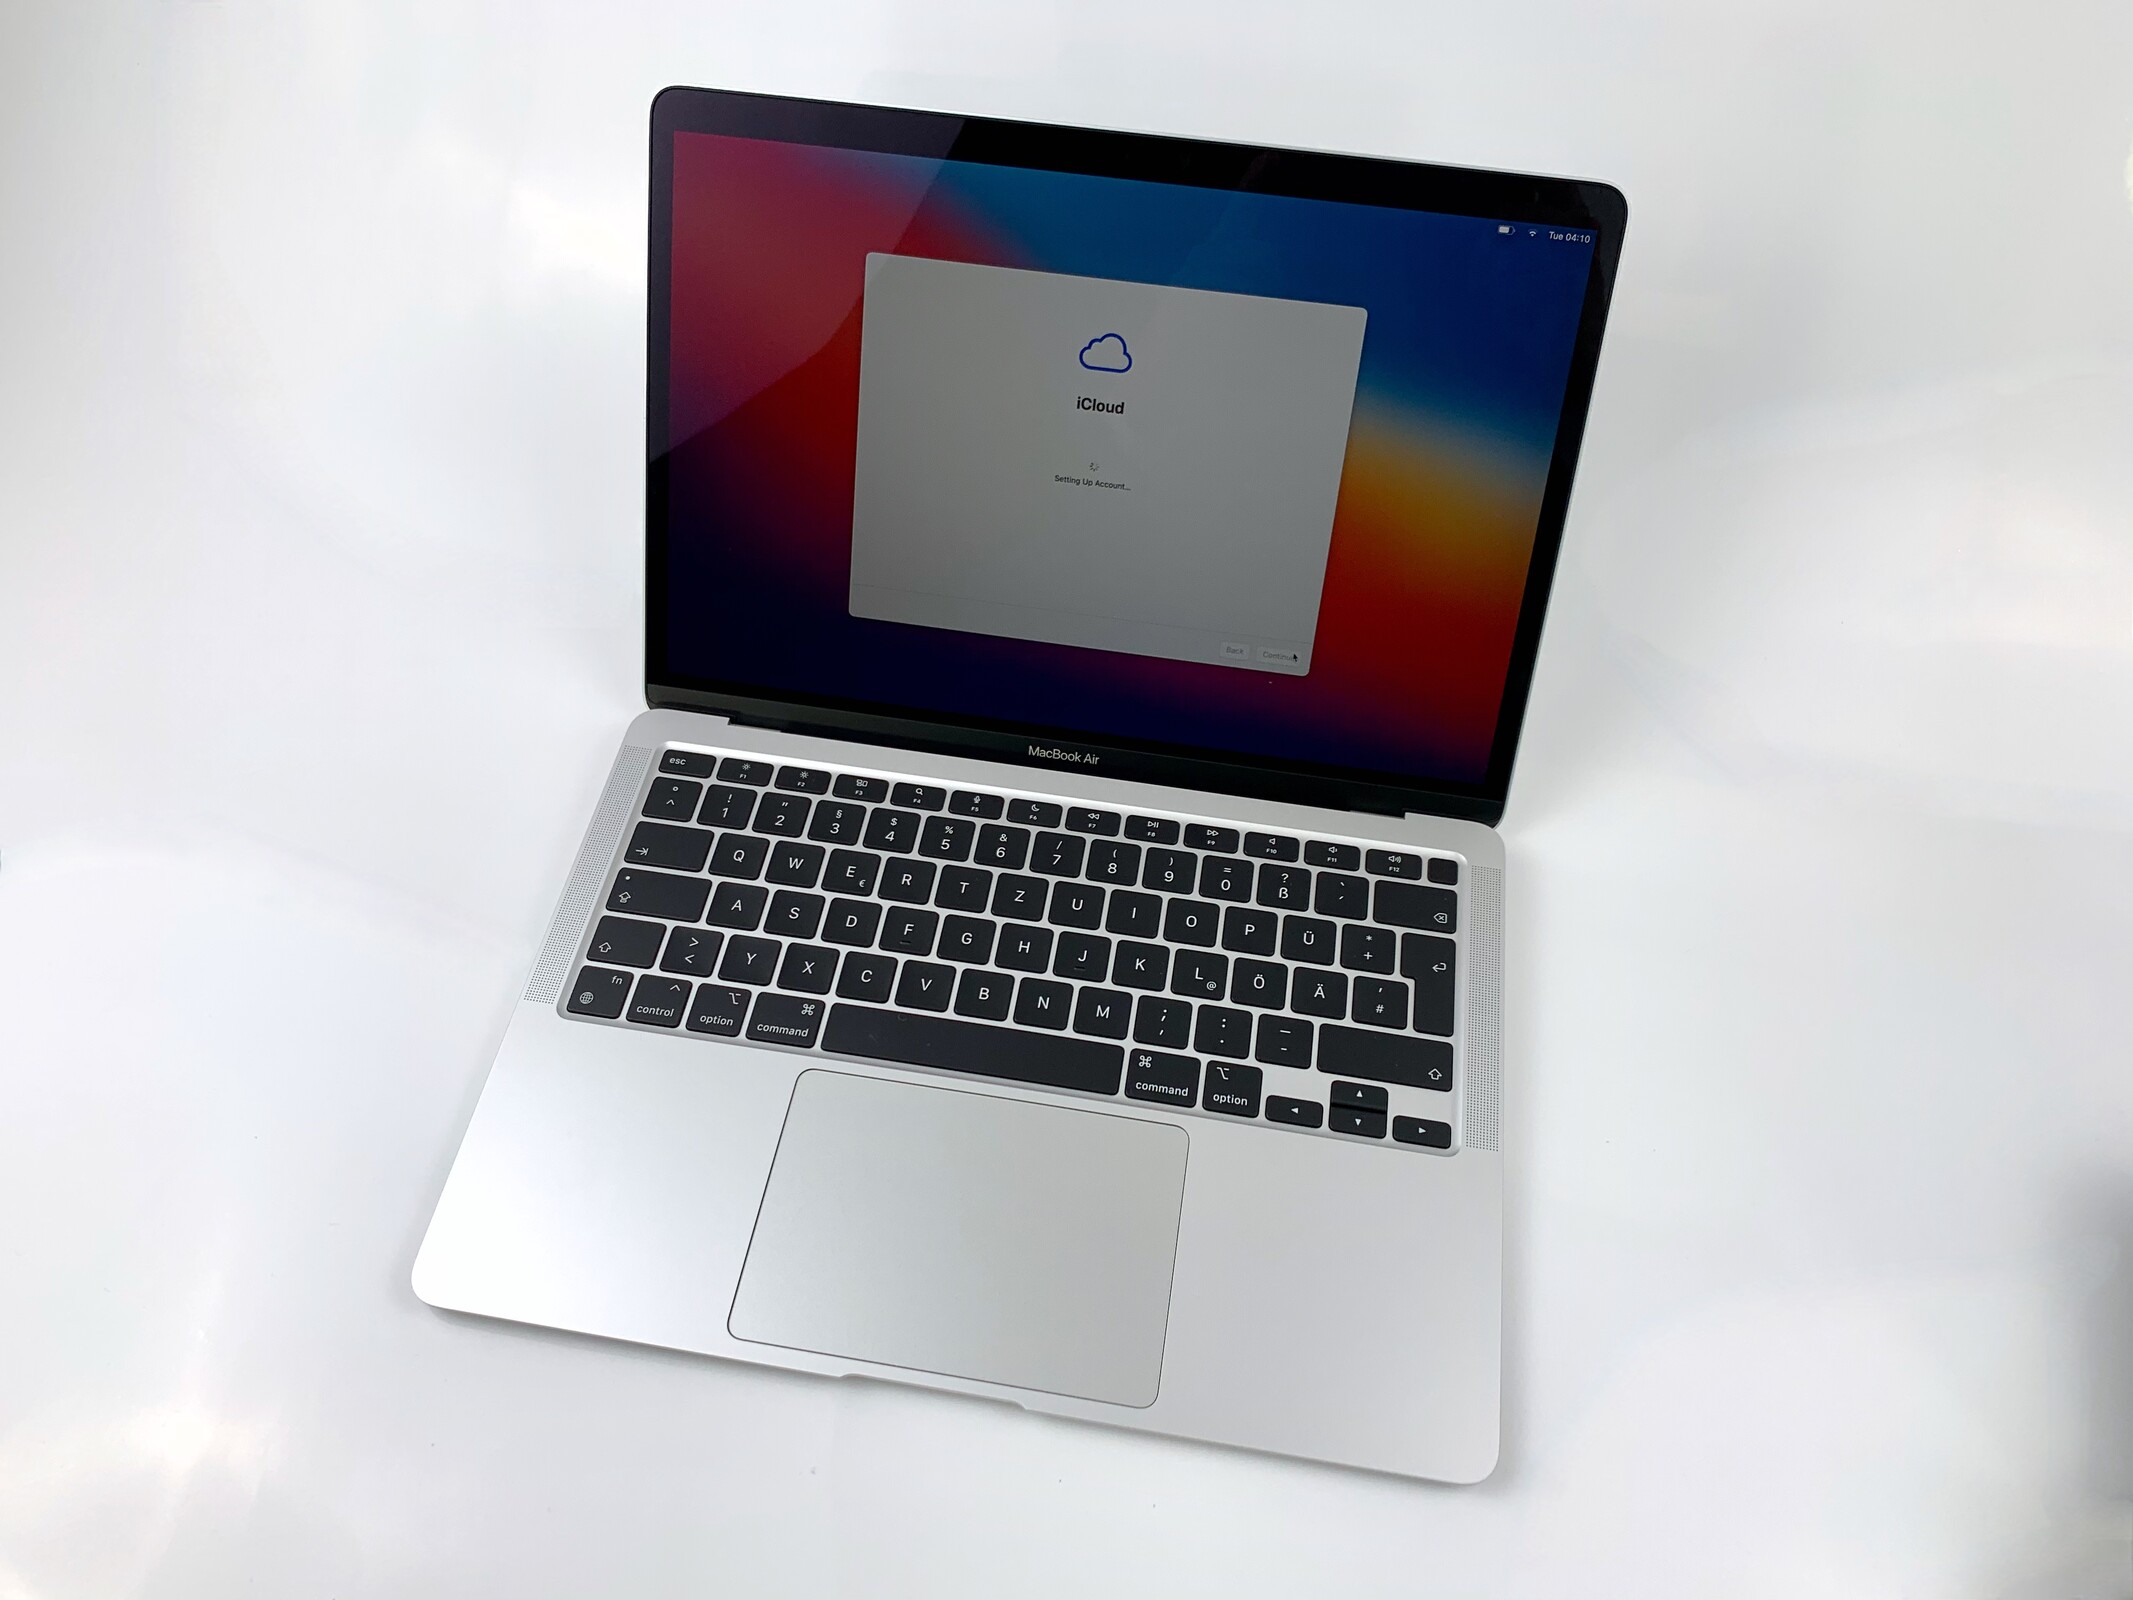 how to get more gigabytes on macbook air